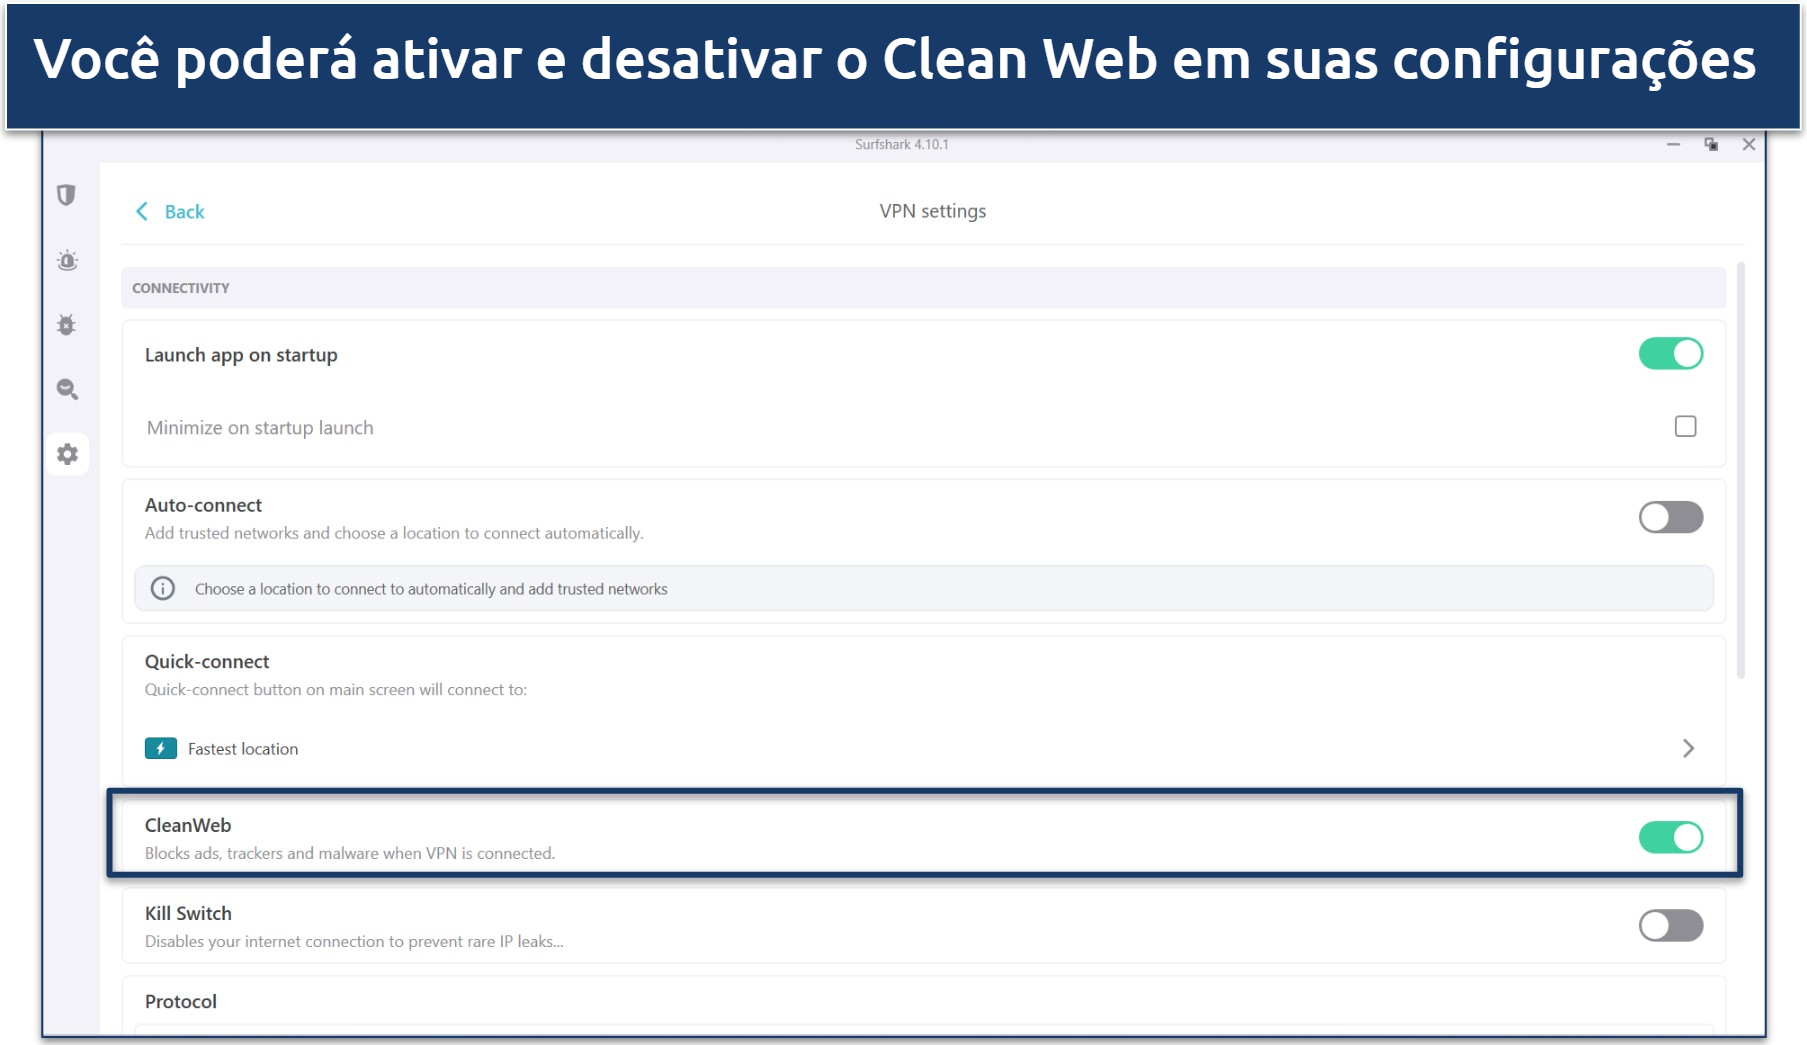 A screenshot of Surfshark's settings showing the CleanWeb ad blocker enabled